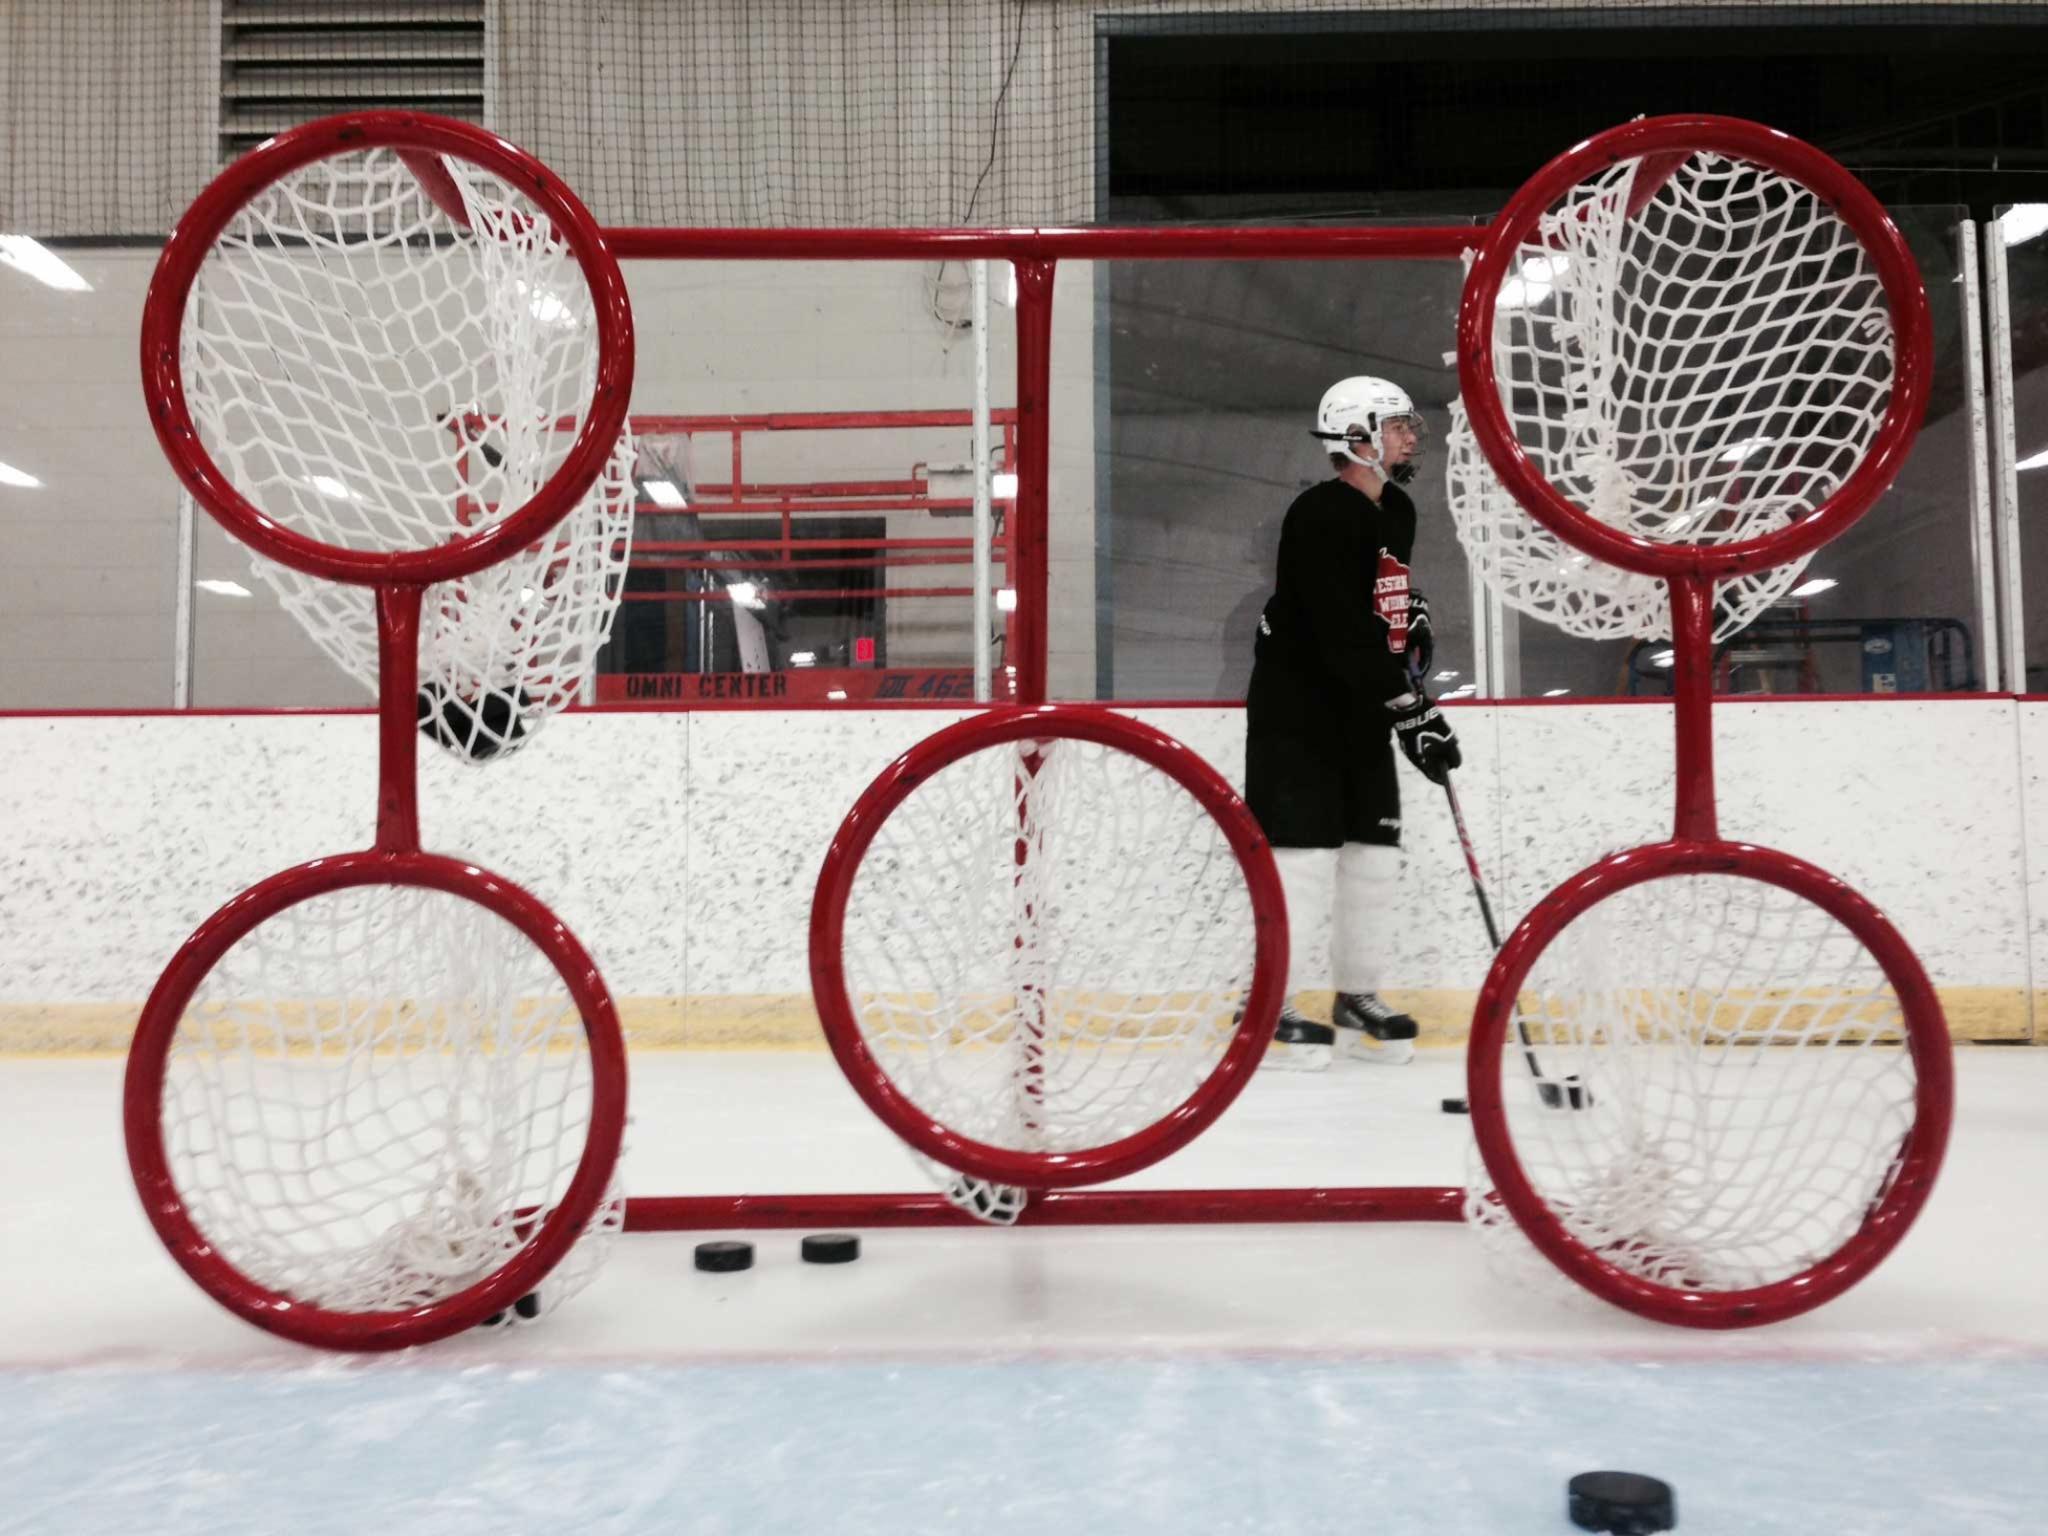 Steel Hockey Training Goals for Shooting Practice and Accuracy, Made in the USA, with Welded Lacing Bar for Net Attachment.